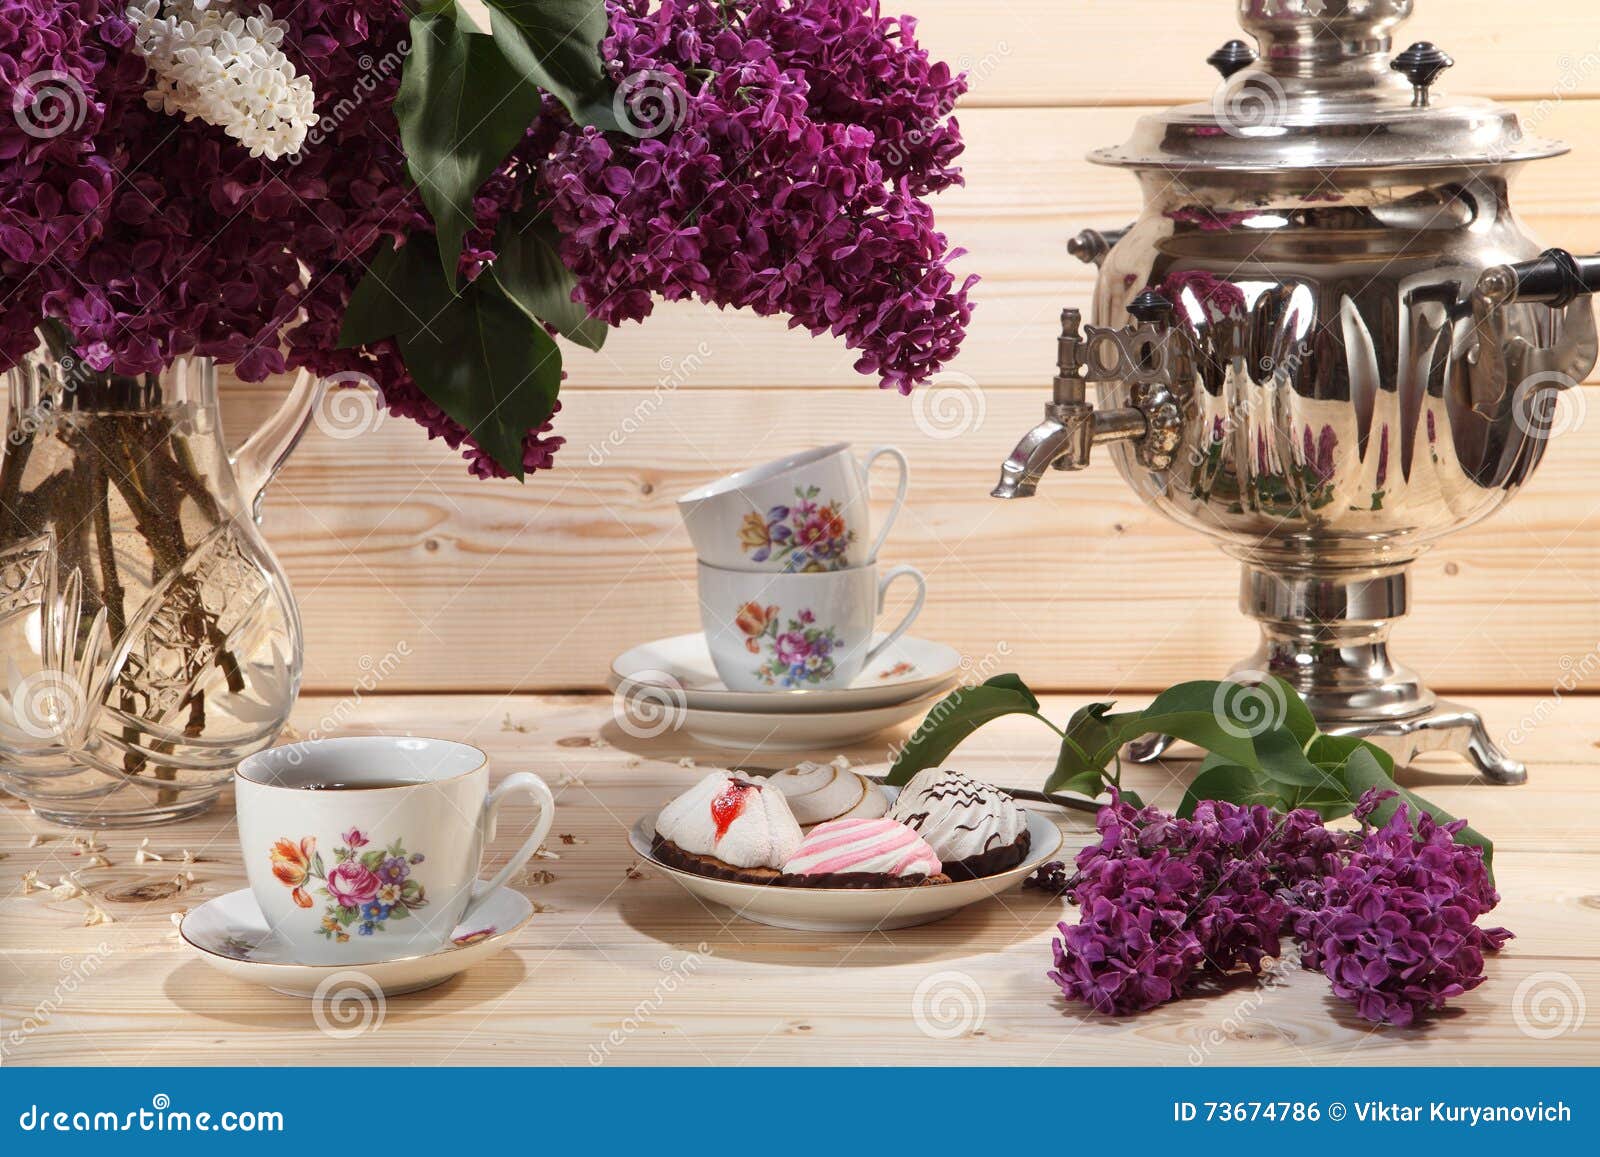 bouquet of lilacs, samovar, cup of tea and buscuit on wooden background